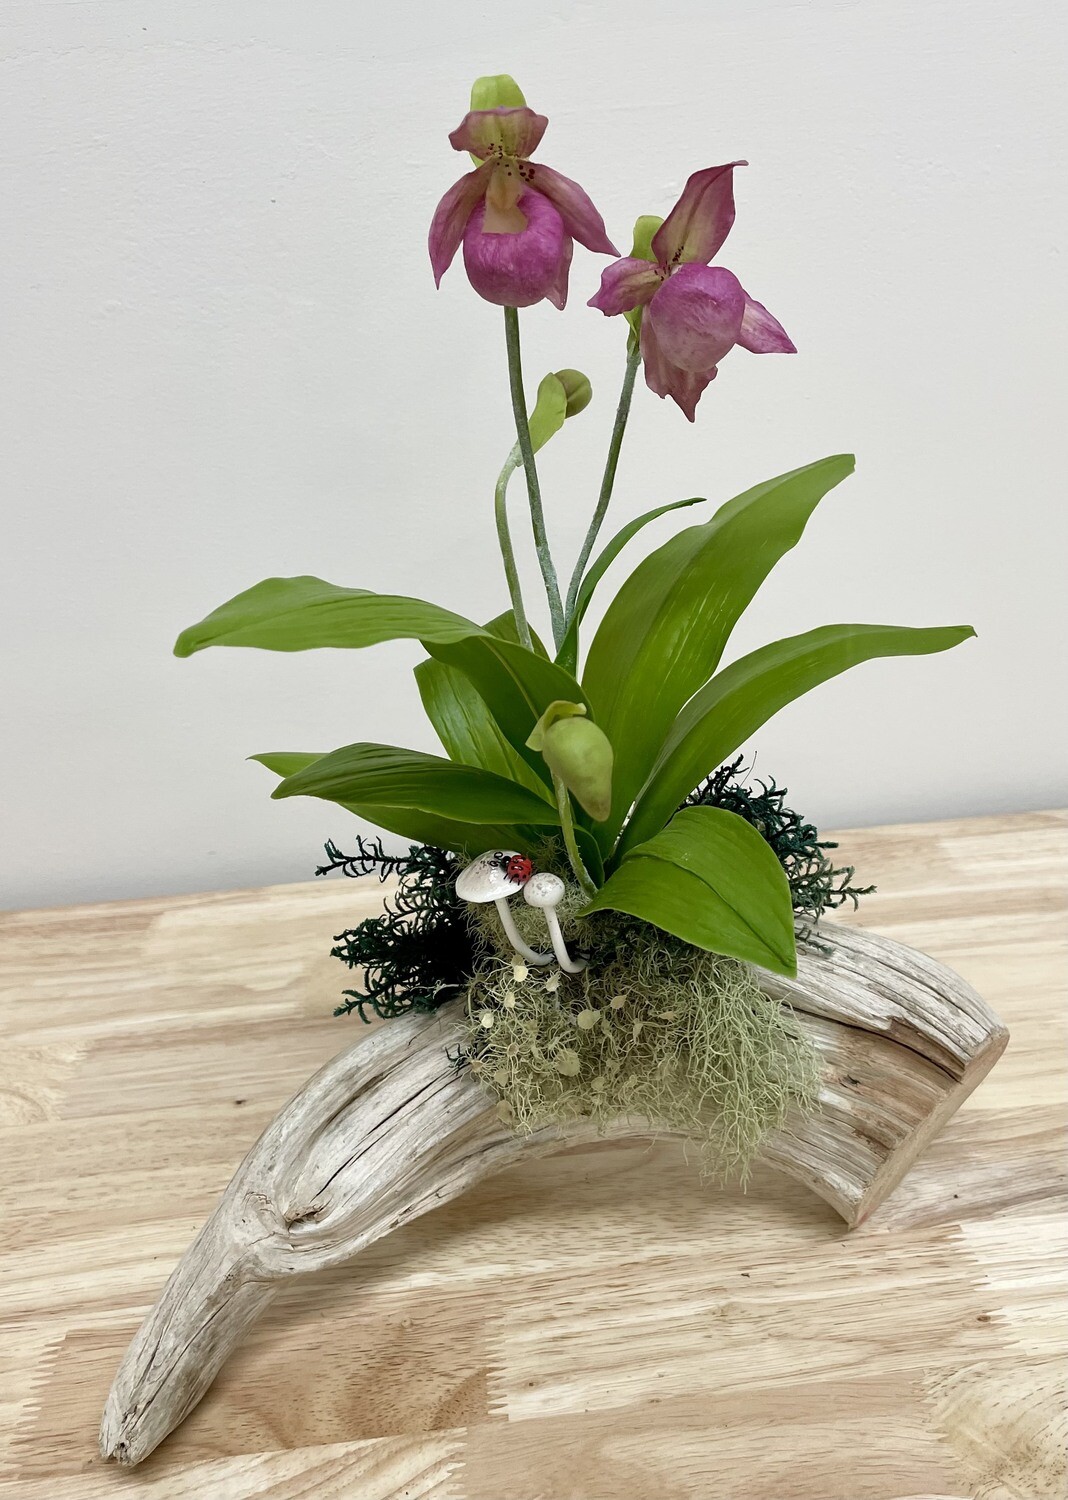 Pink Lady Slipper Orchids on Driftwood 